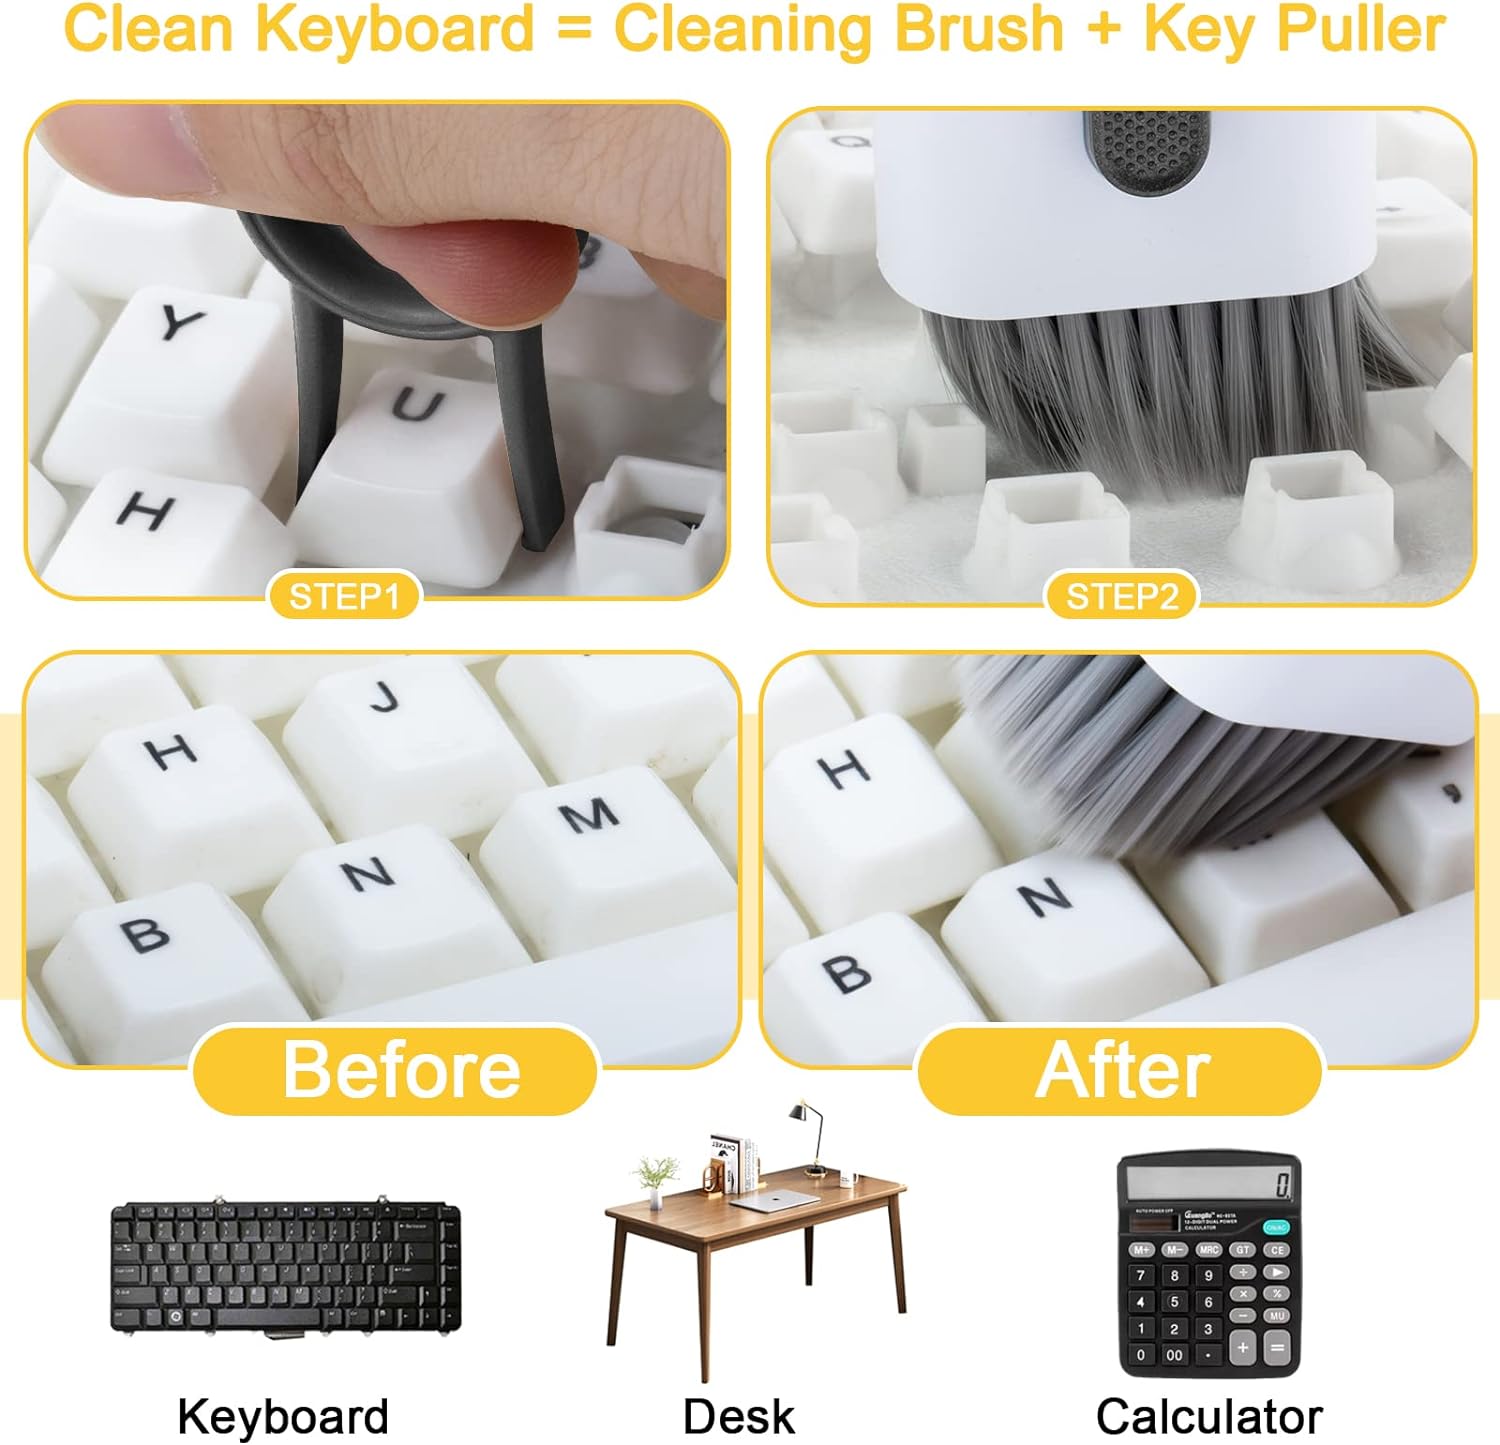 DauMeiQH Laptop Phone TV Screen Keyboard Cleaner Brush Kit for iPhone iPad MacBook PC Computer, 7-in-1 Electronics Earbud Cleaning Pen Tool for Airpod Pro EarPod Earphone - 5ml Touchscreen Mist Spray